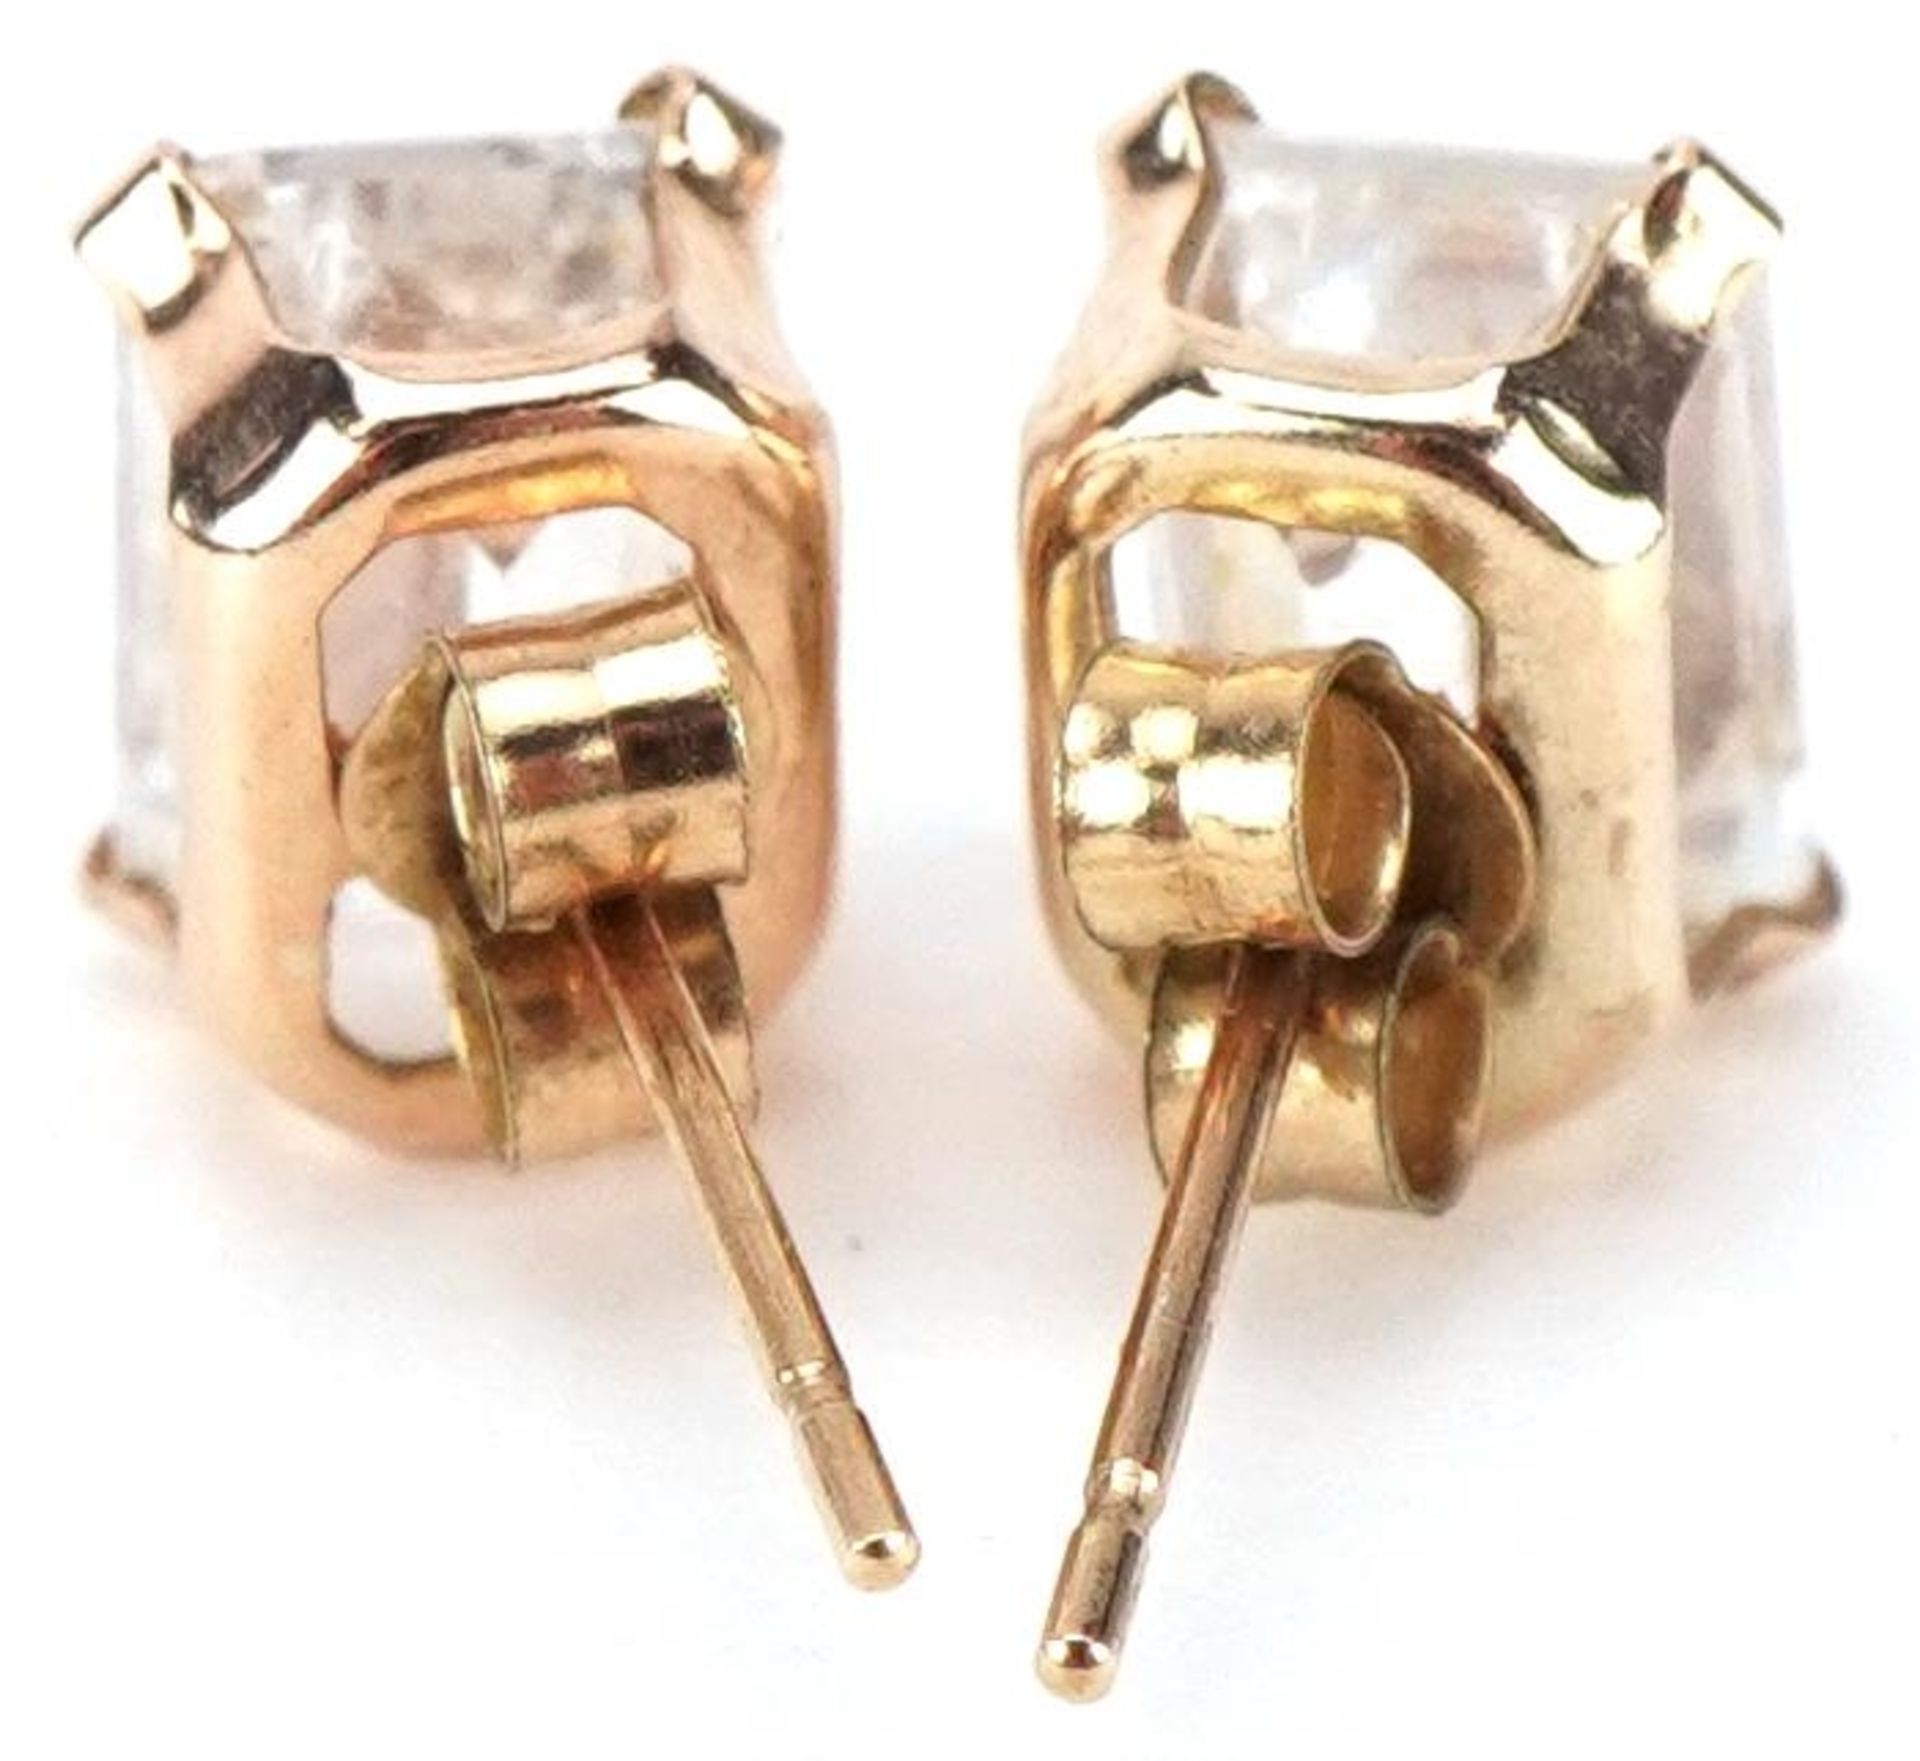 Pair of 9ct gold clear stone stud earrings, each 7mm high, total 1.1g - Image 3 of 3